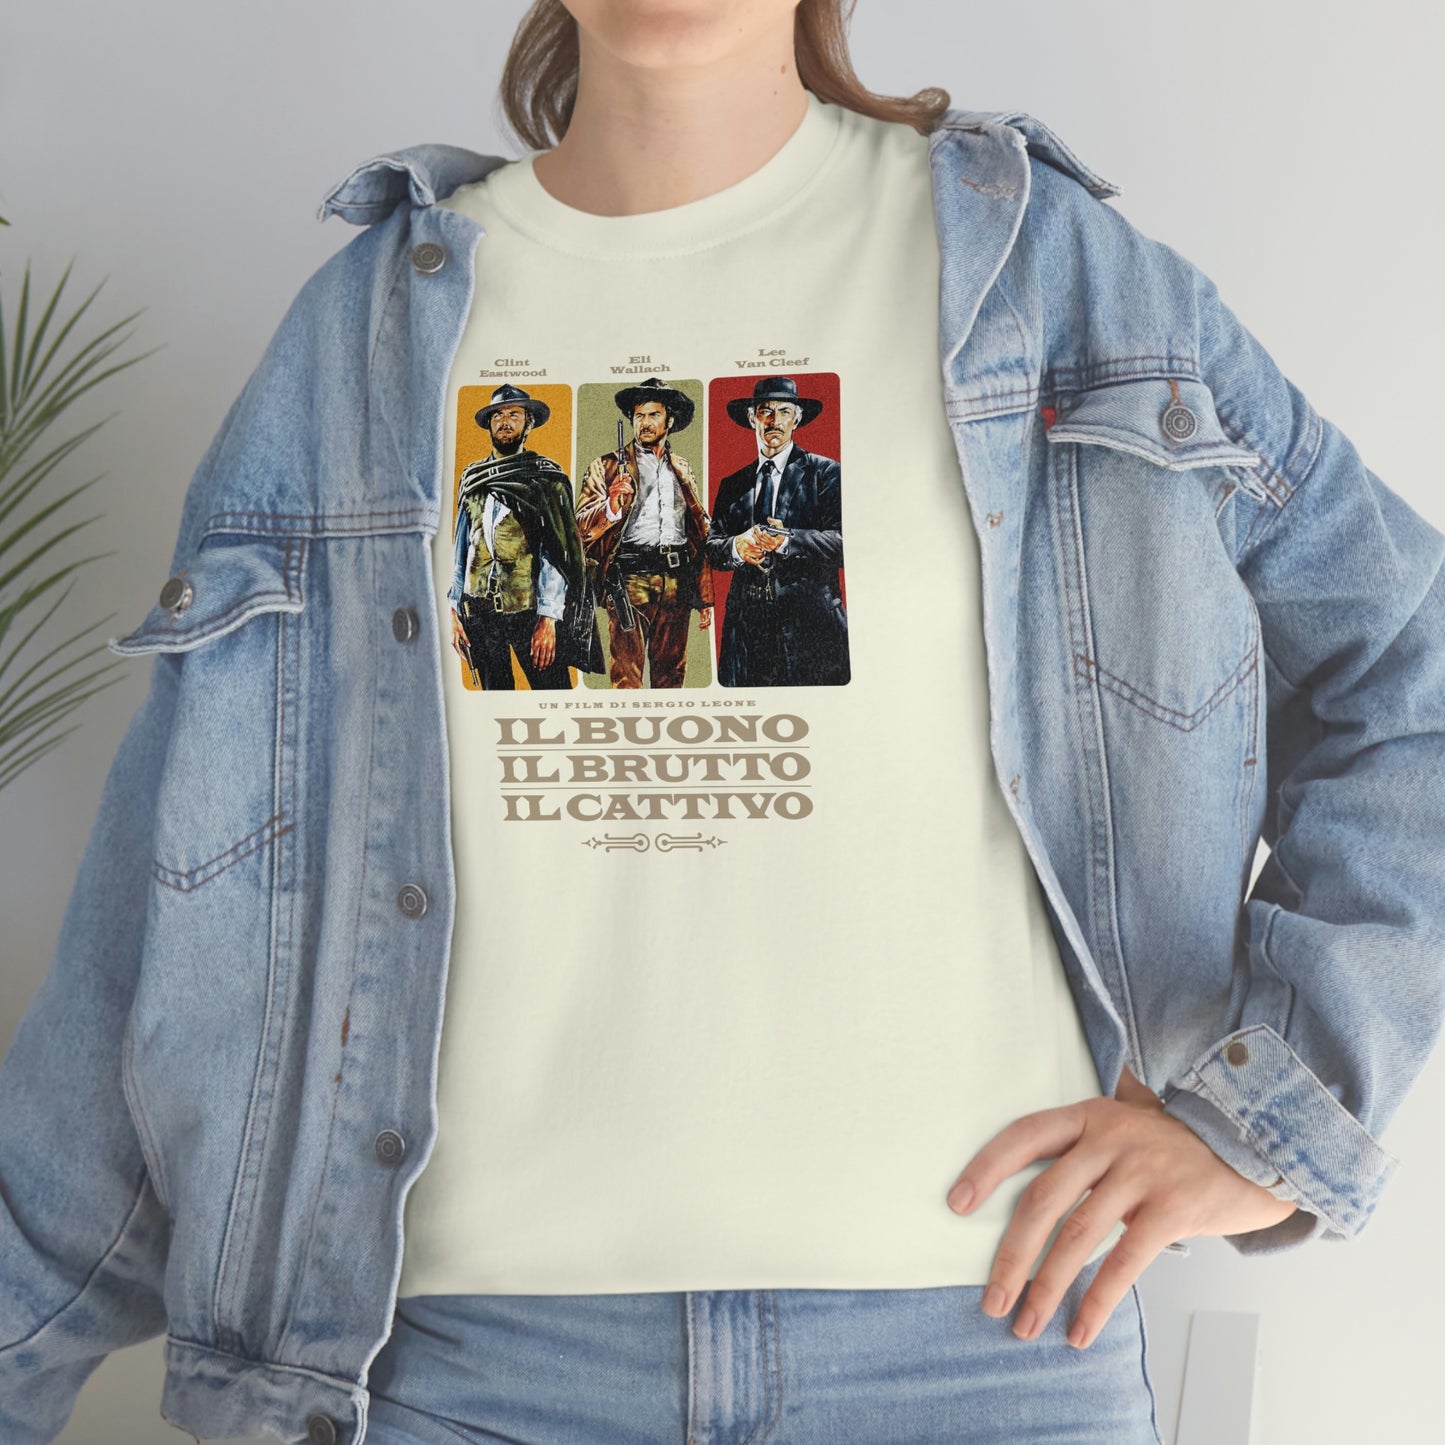 The Good, The Bad and the Ugly T-Shirt